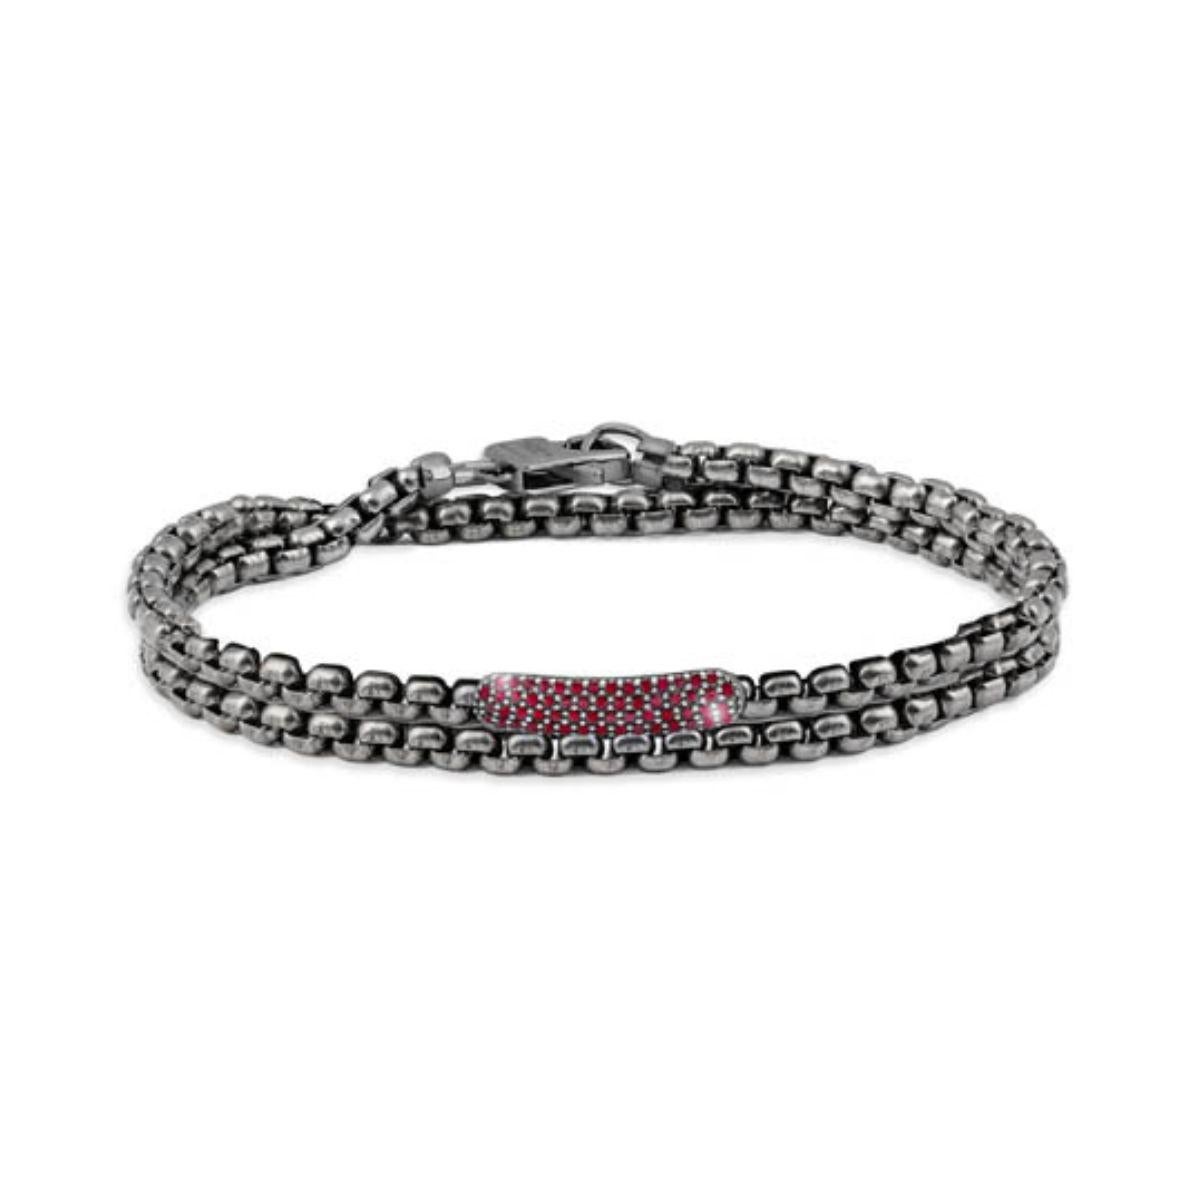 Men's Black Rhodium Plated Sterling Silver Catena Baton Bracelet with Rubies, Size S For Sale